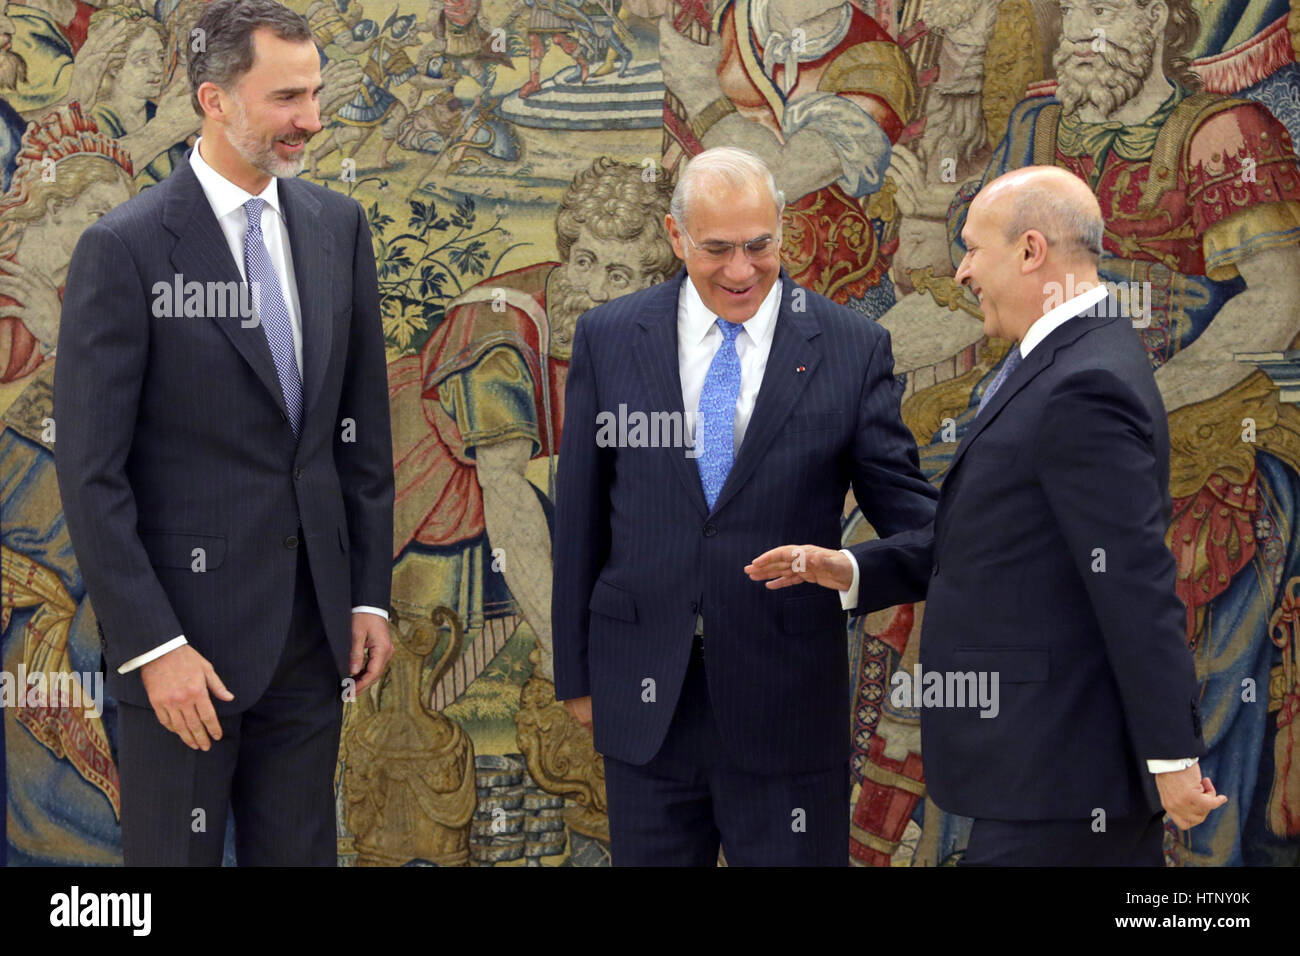 Madrid, Spain. 13th Mar, 2017. Spanish King Felipe VI during audience with the Secretary General of the Organization for Economic Cooperation and Development (OECD), Angel Gurria Treviño at the Palacio de la Zarzuela in Madrid on Monday 13 March 2017. Credit: Gtres Información más Comuniación on line,S.L./Alamy Live News Stock Photo